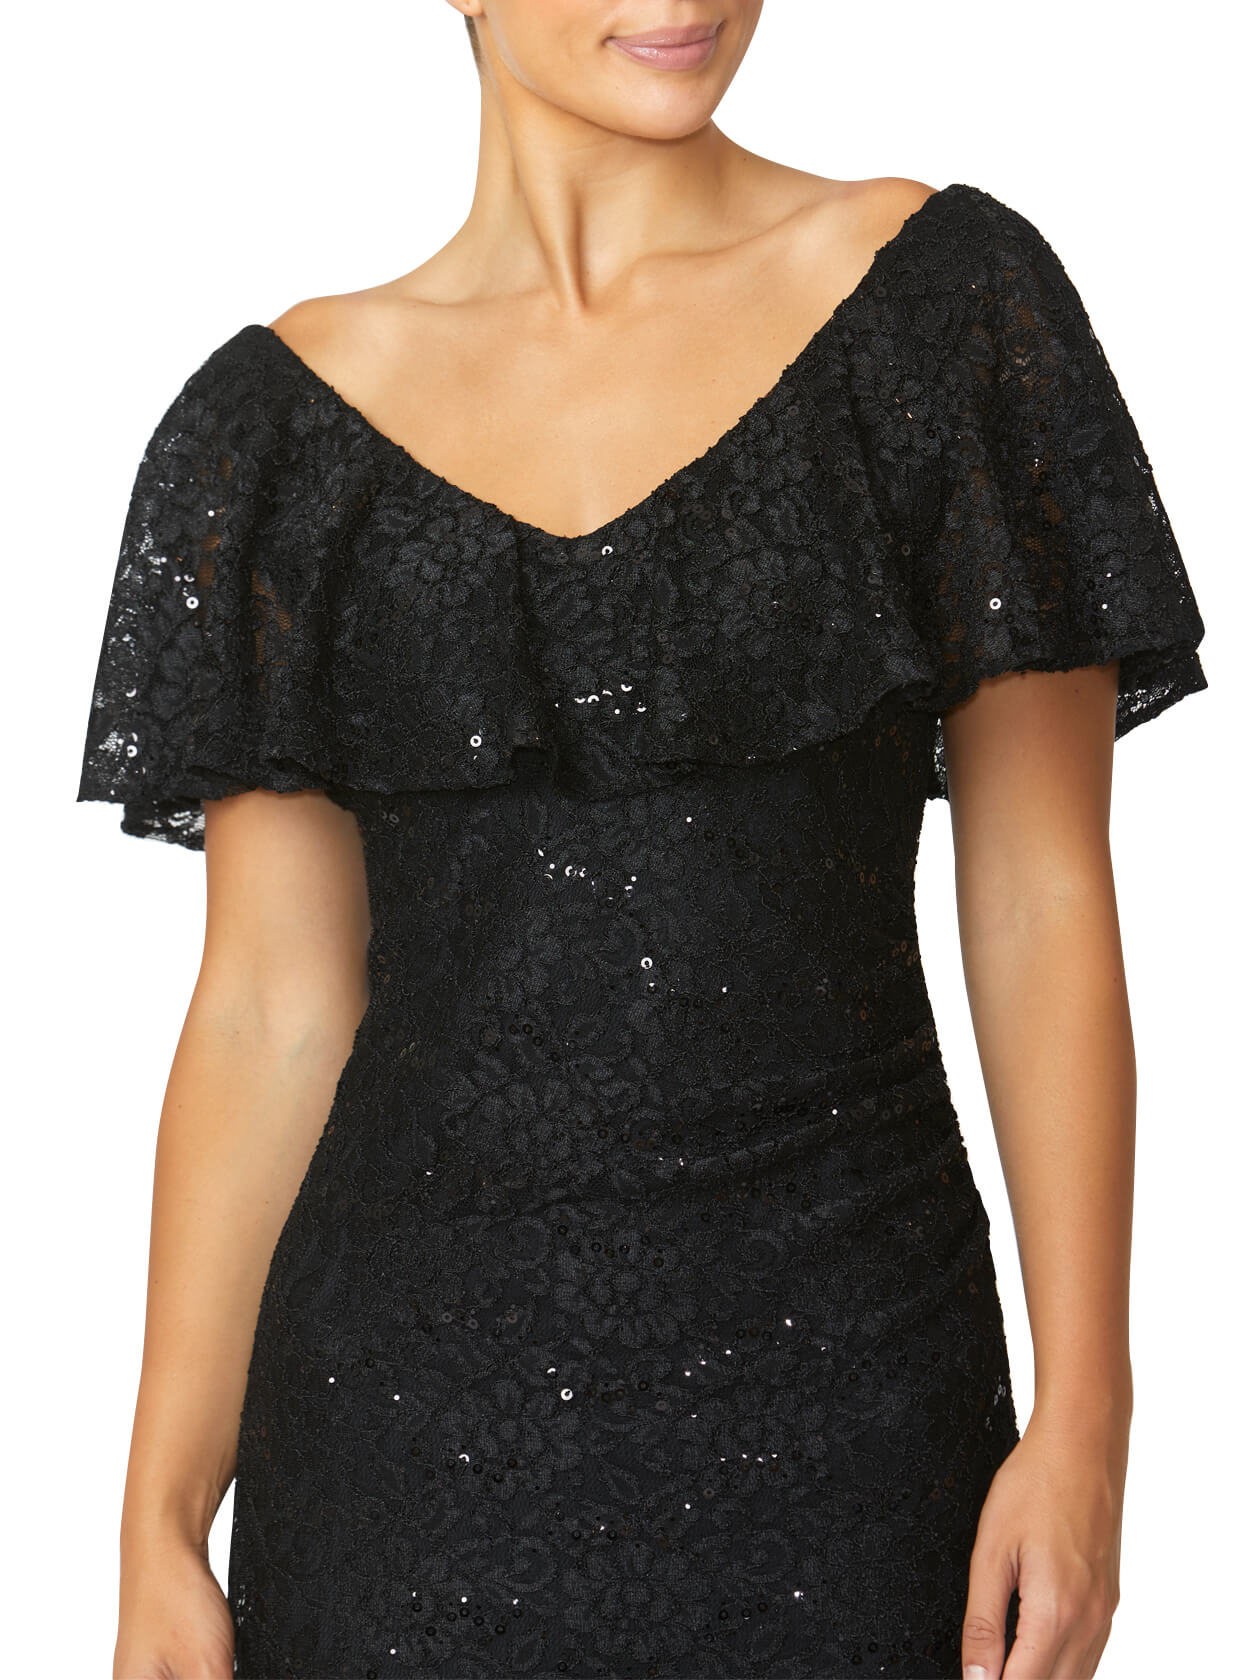 Trudy Black Sequin Lace Gown